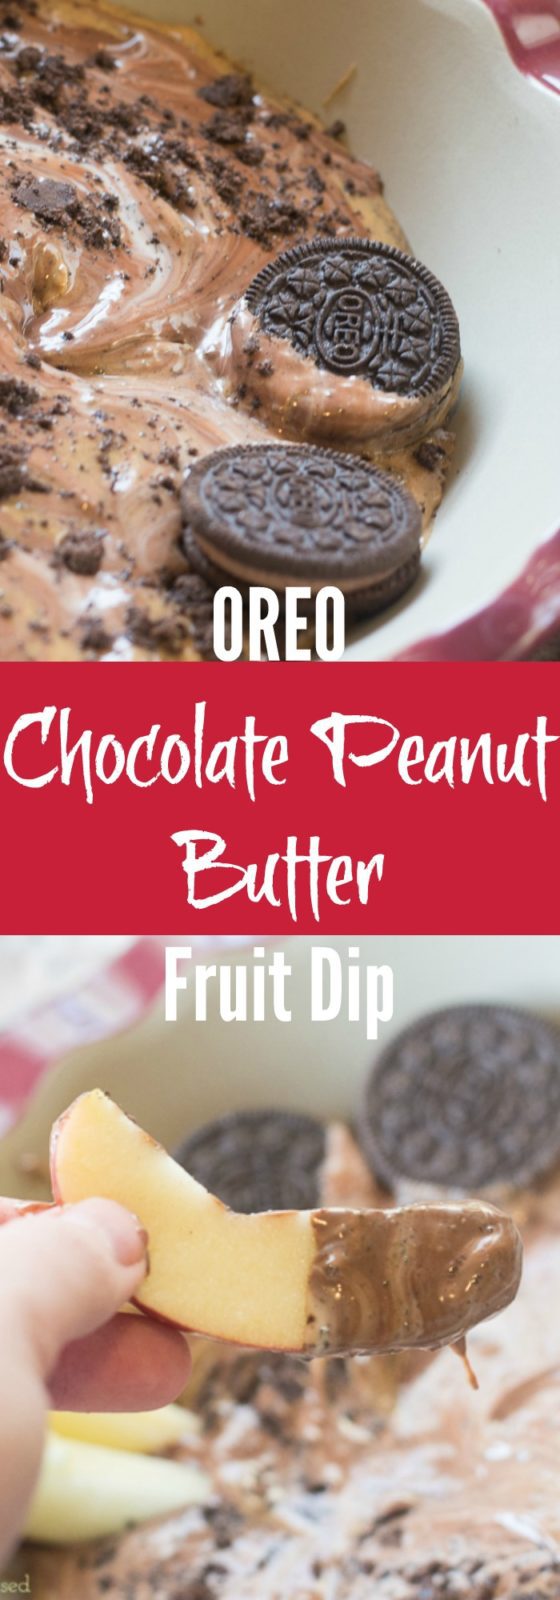 This is the only fruit dip recipe you need - it's creamy, it's chocolate-y, and it's sure to be a hit! OREO Chocolate Peanut butter fruit dip